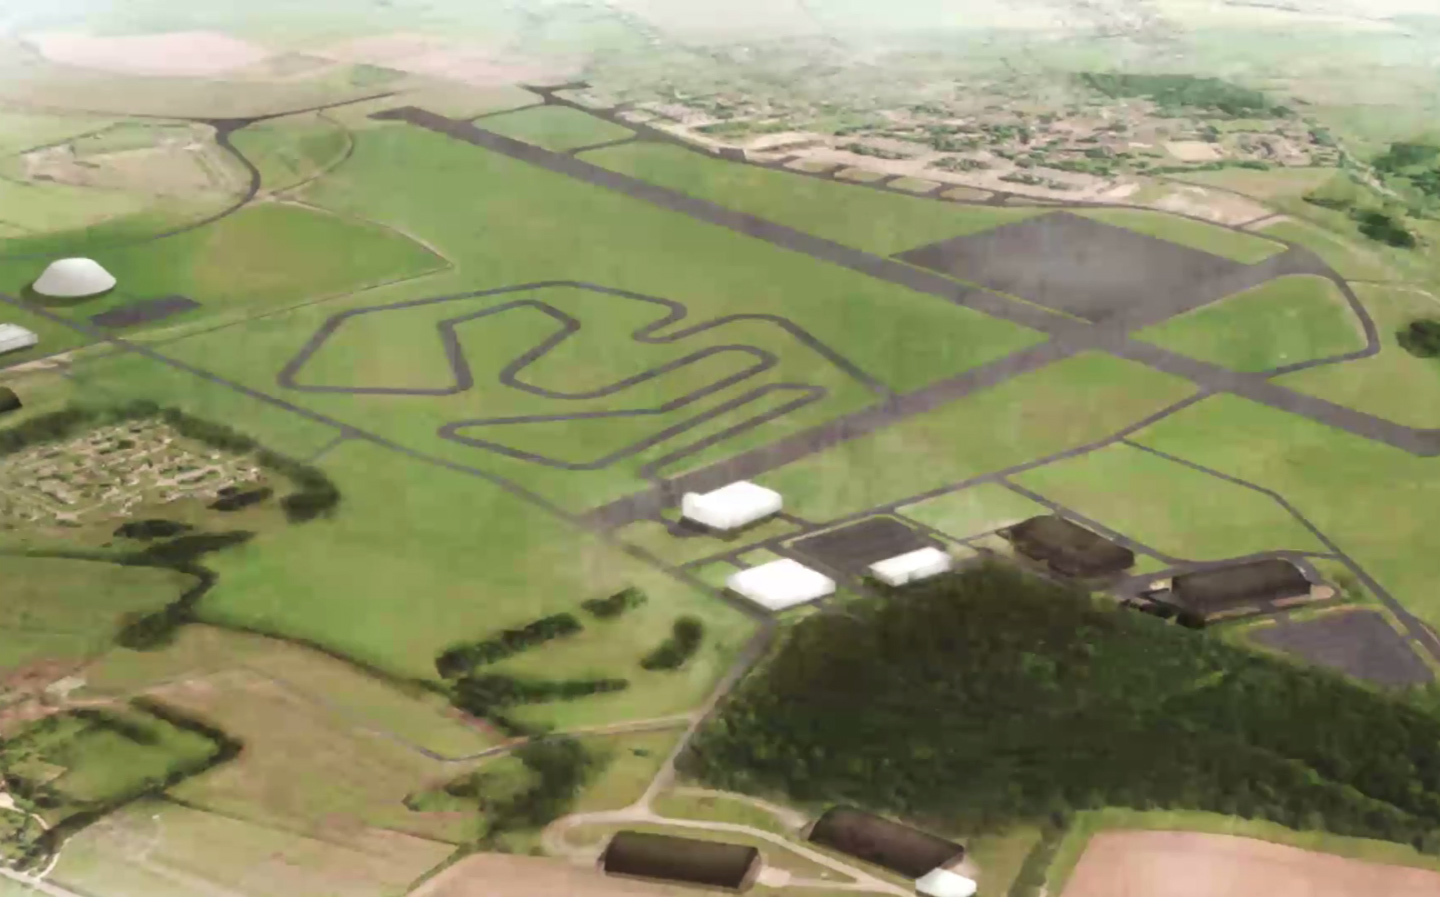 Dyson will build a £550m electric car test track in Britain